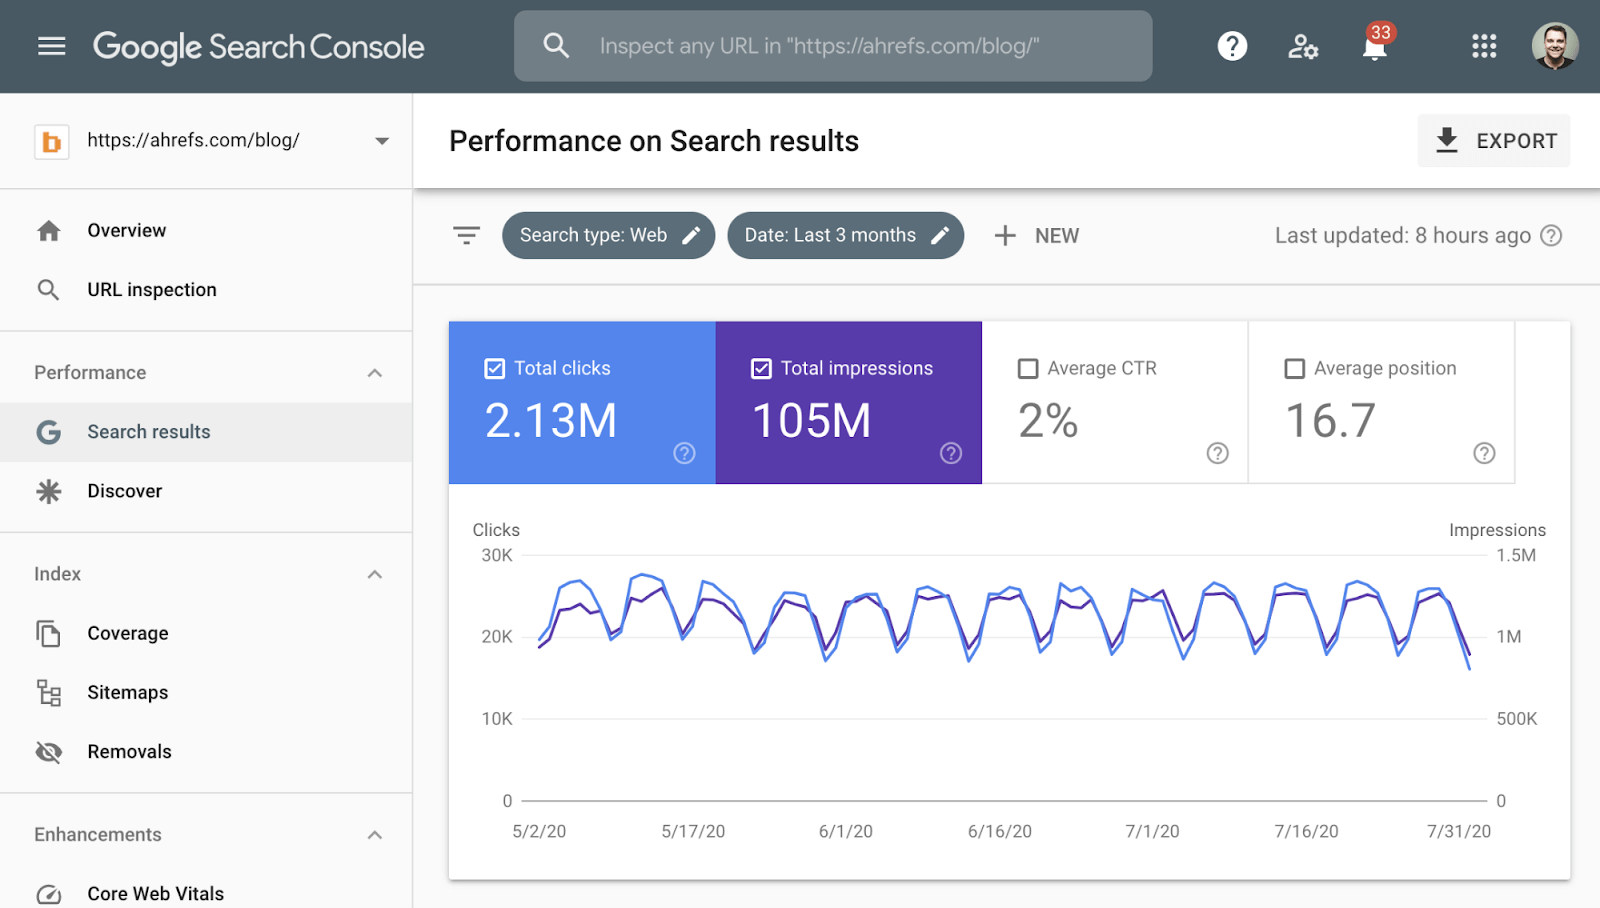 hiết lập Google Search Console